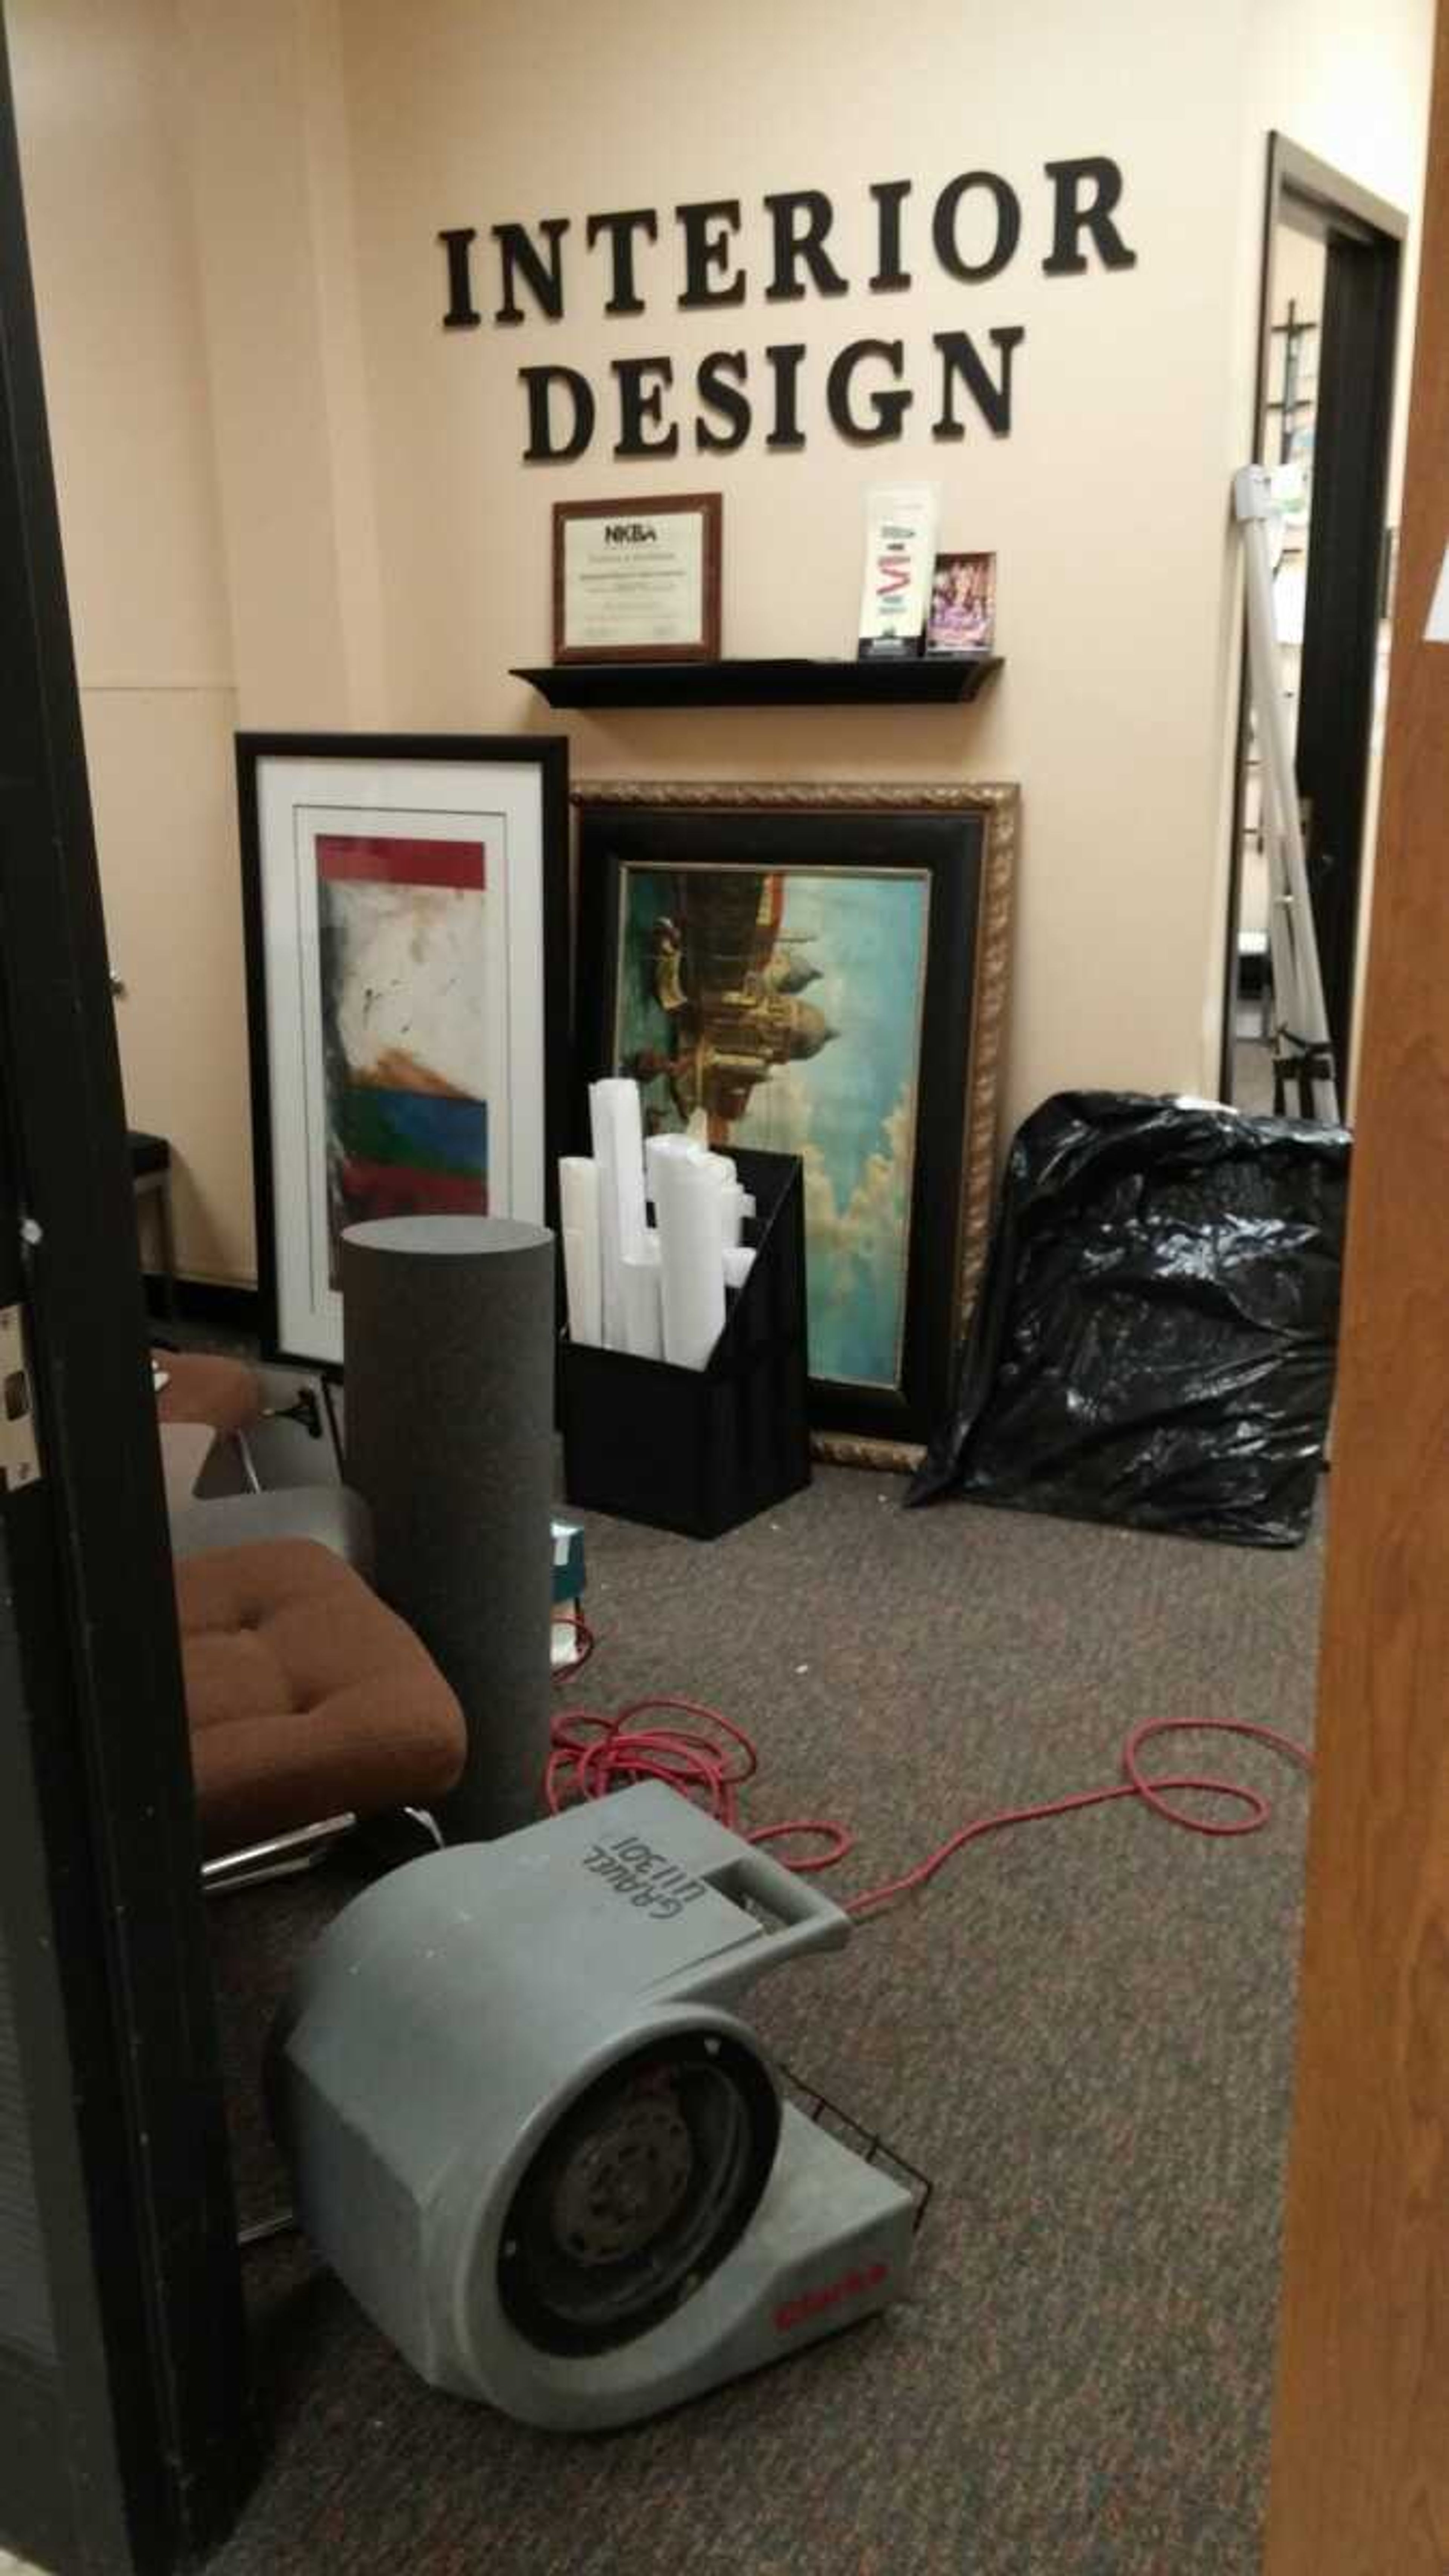 Offices inside Scully Building were cleaned after the flooding occured. Photo by Karley McDaniel.